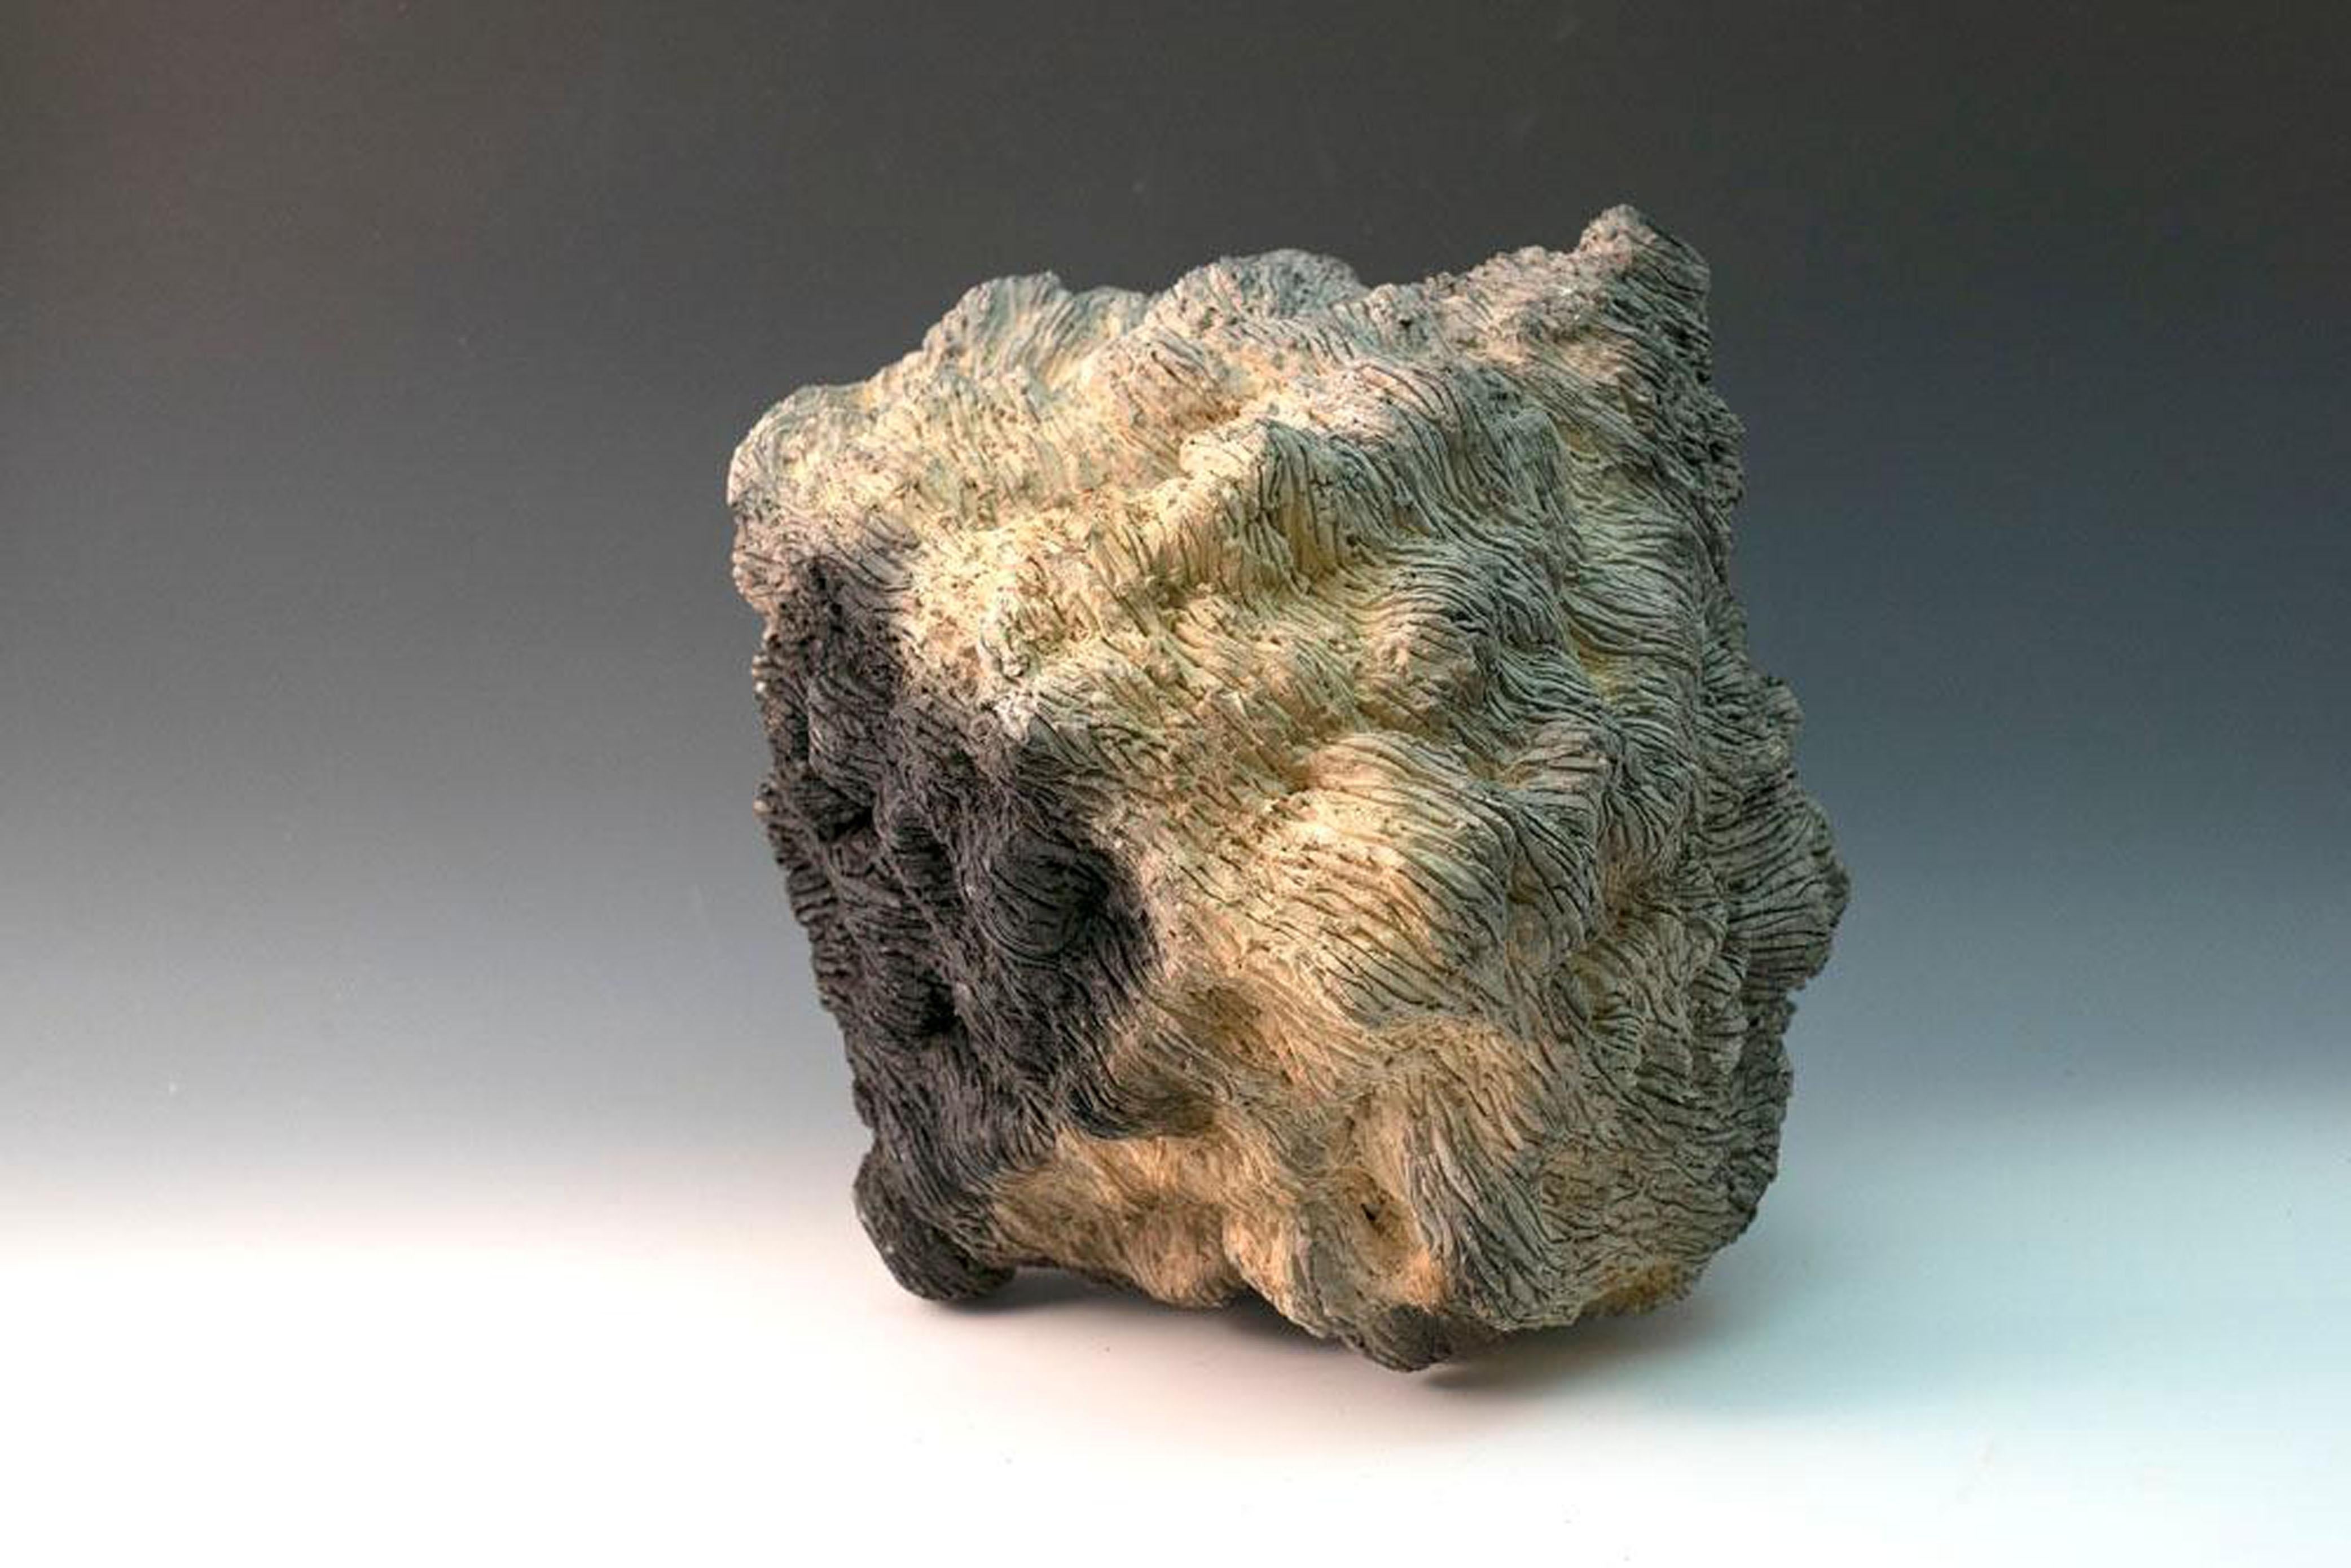 Allan Drossman Abstract Sculpture - "Woven Environment", textured ceramic in grays, embodies essential clay